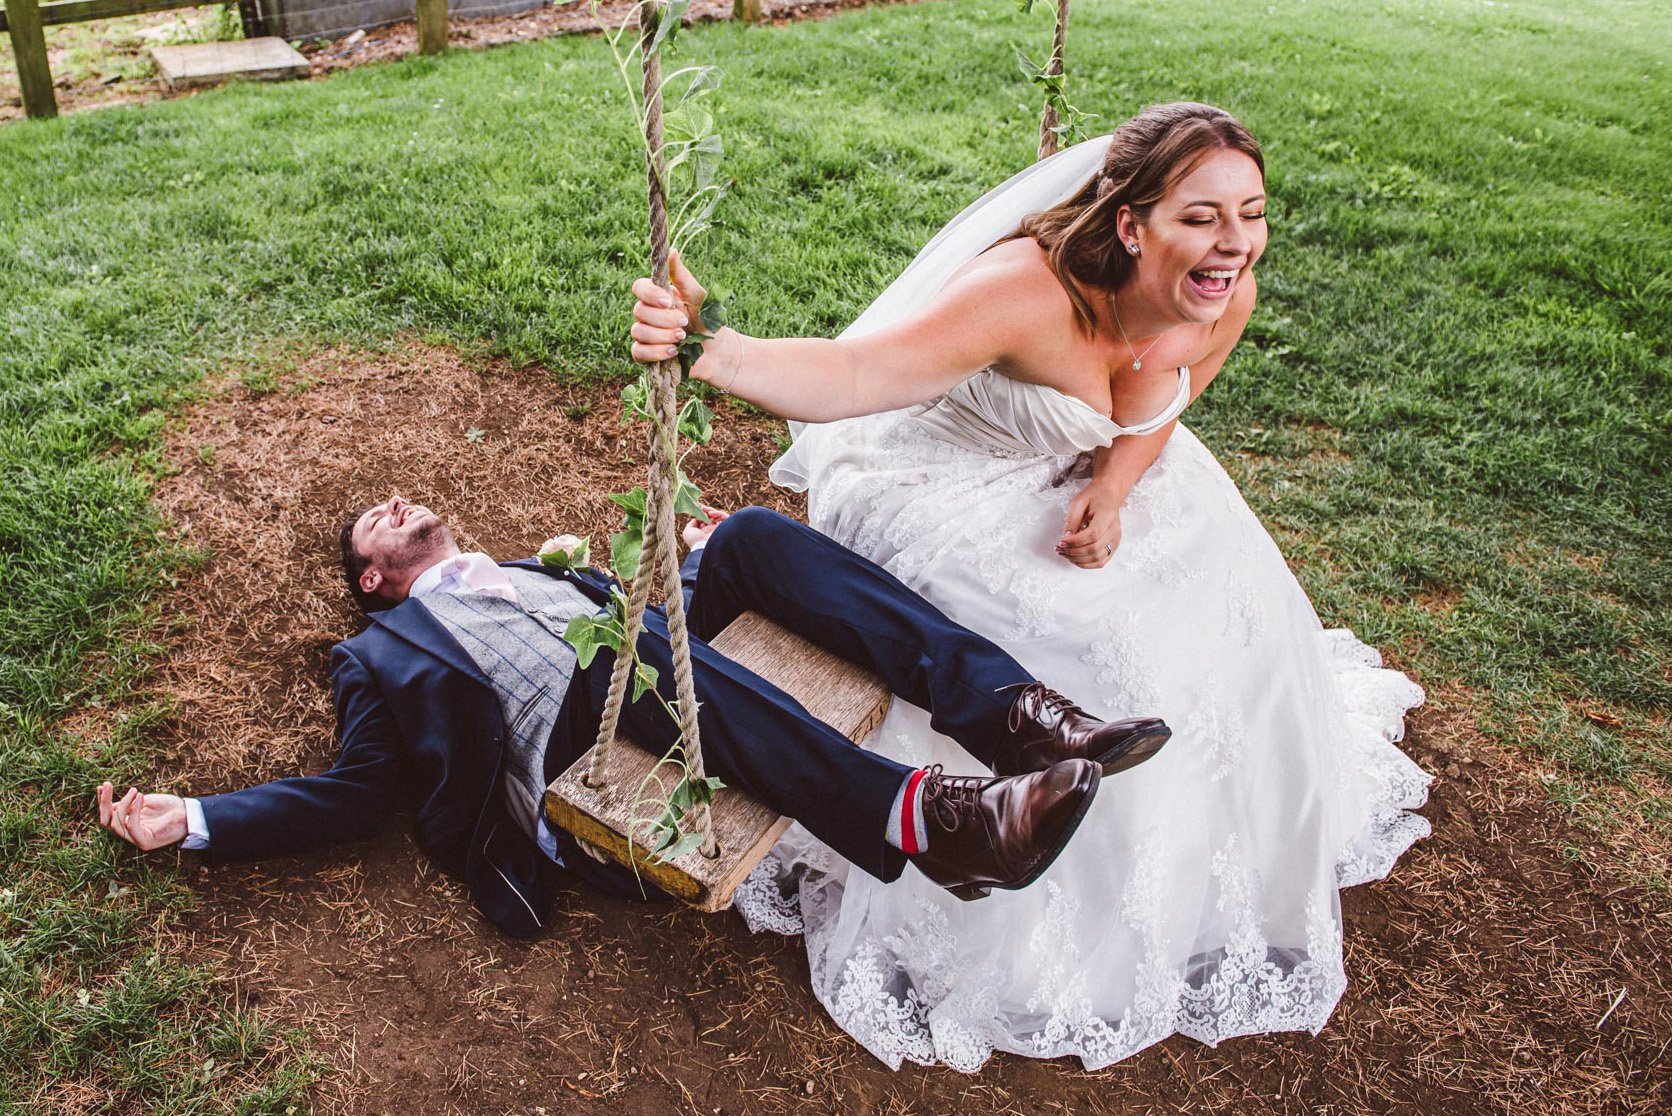 A bride laughs at her groom after he falls off a swing onto his back